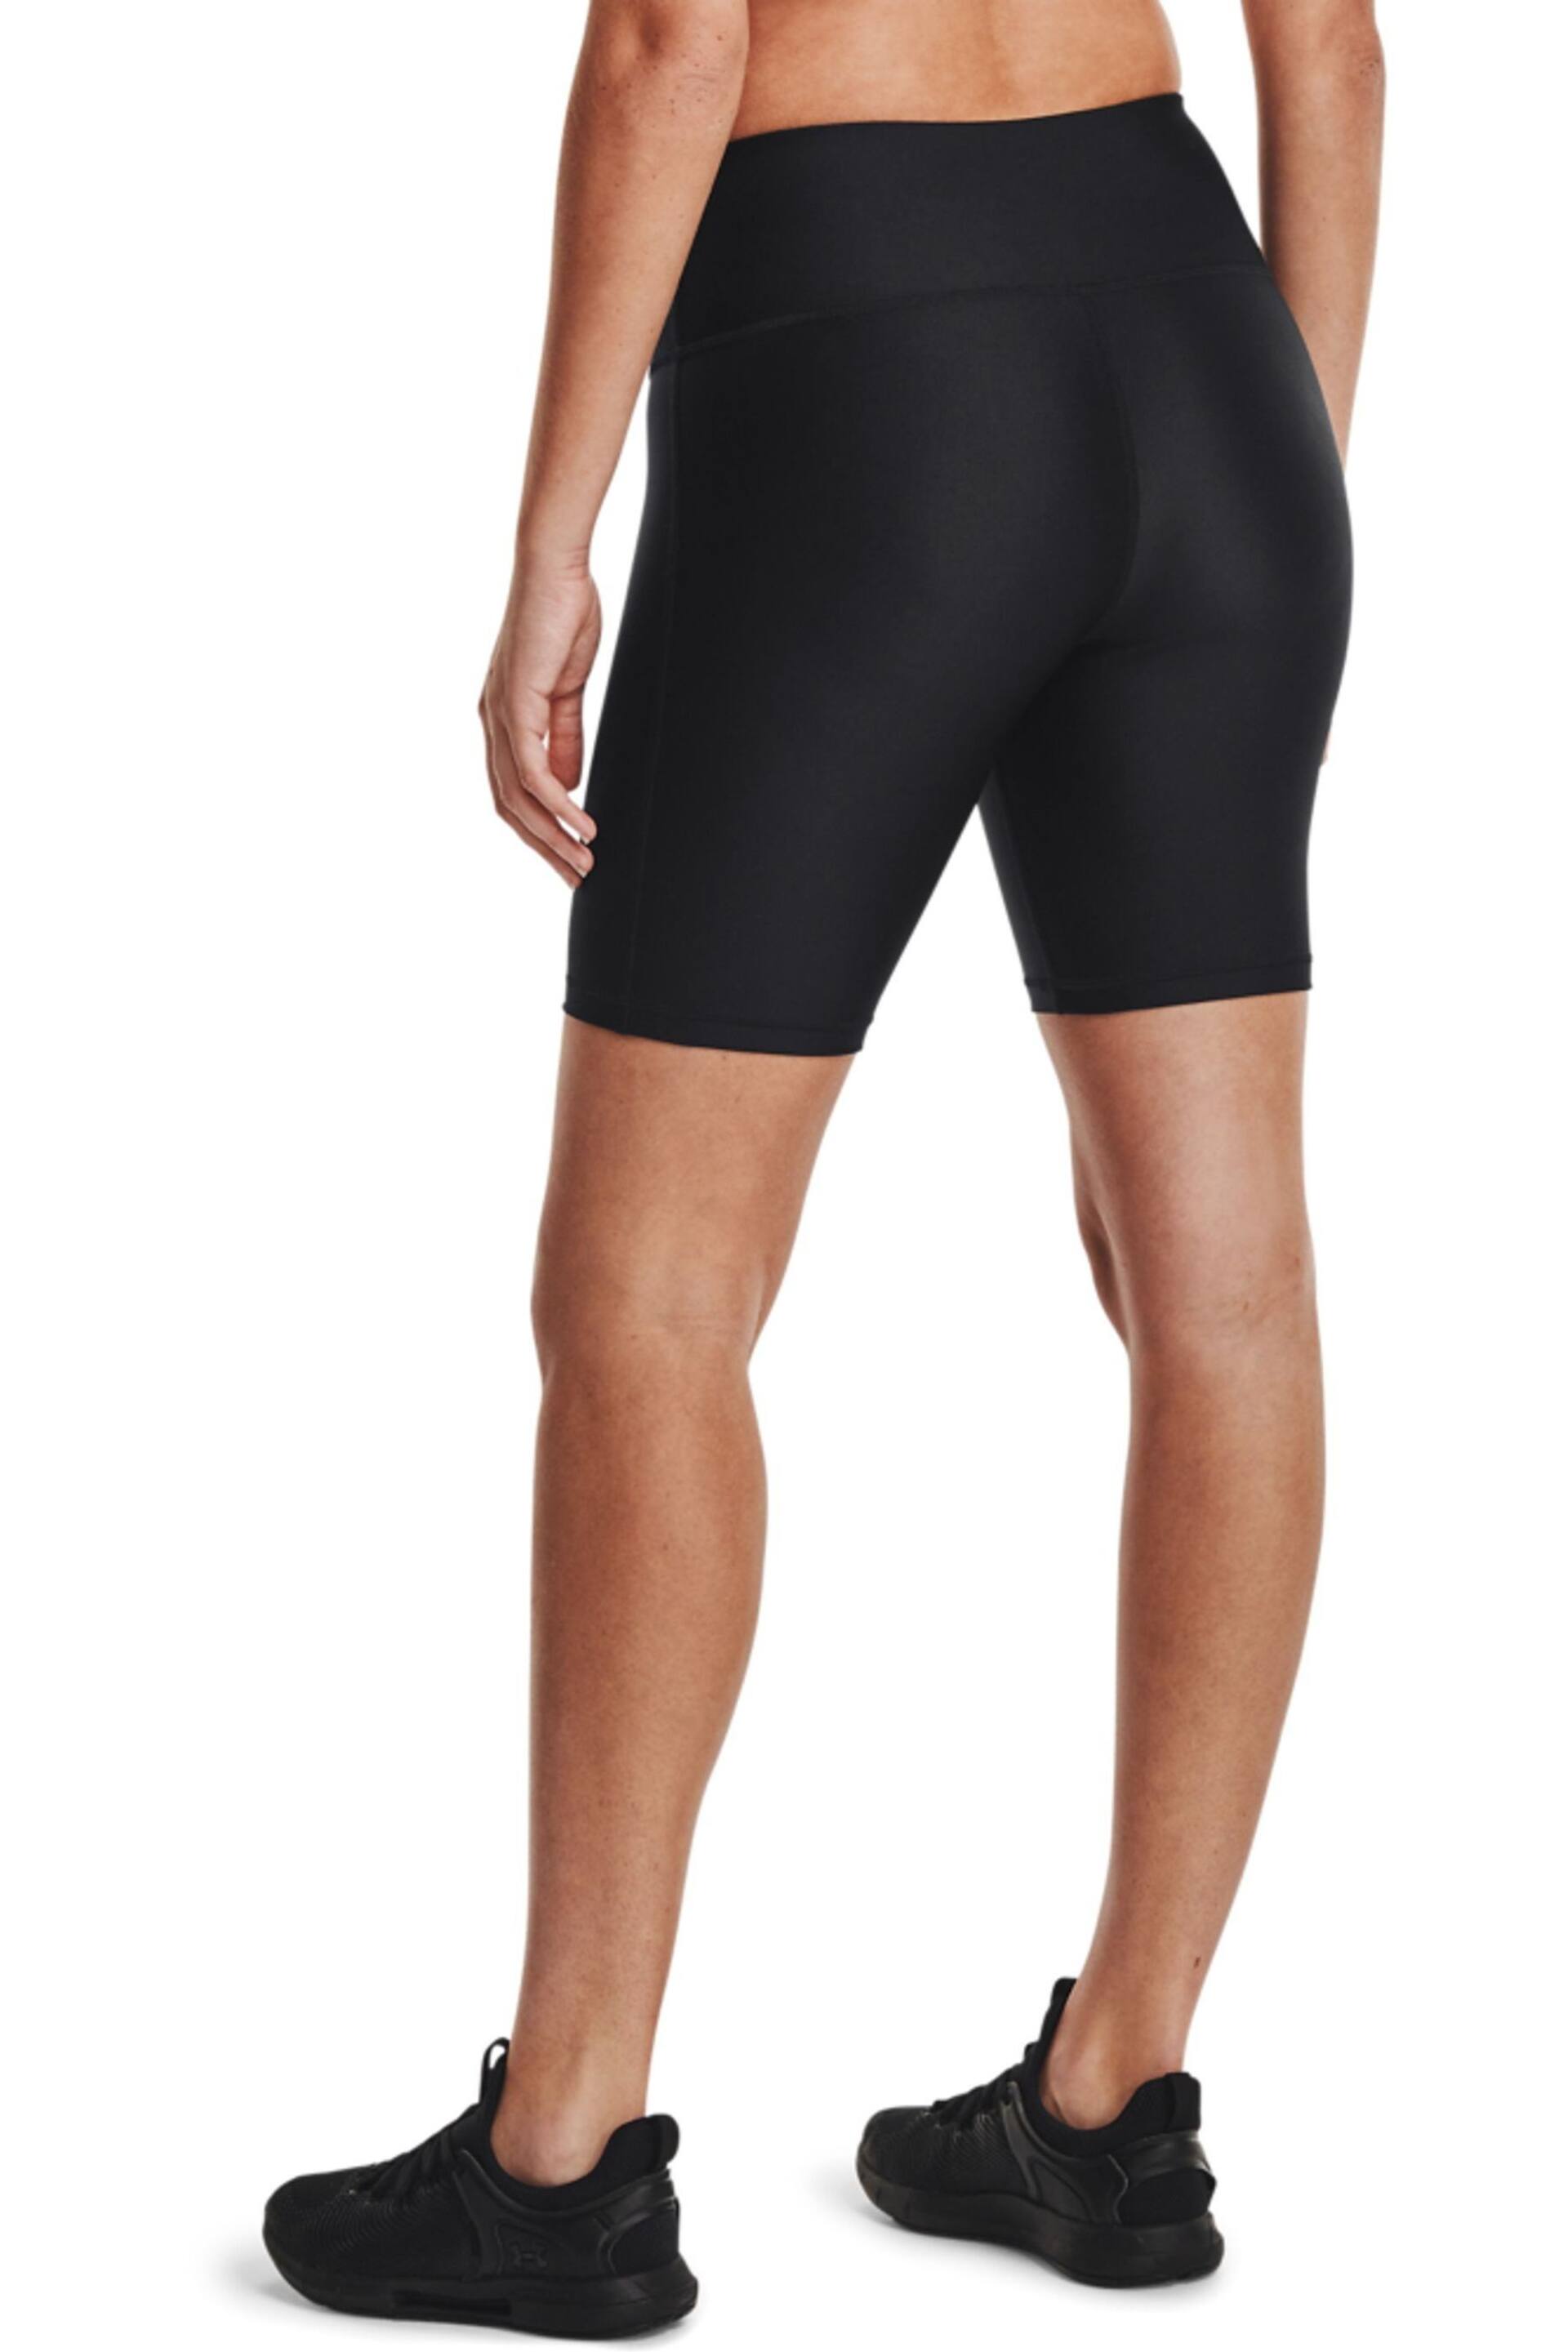 Under Armour HG Armour Cycling Shorts - Image 2 of 5